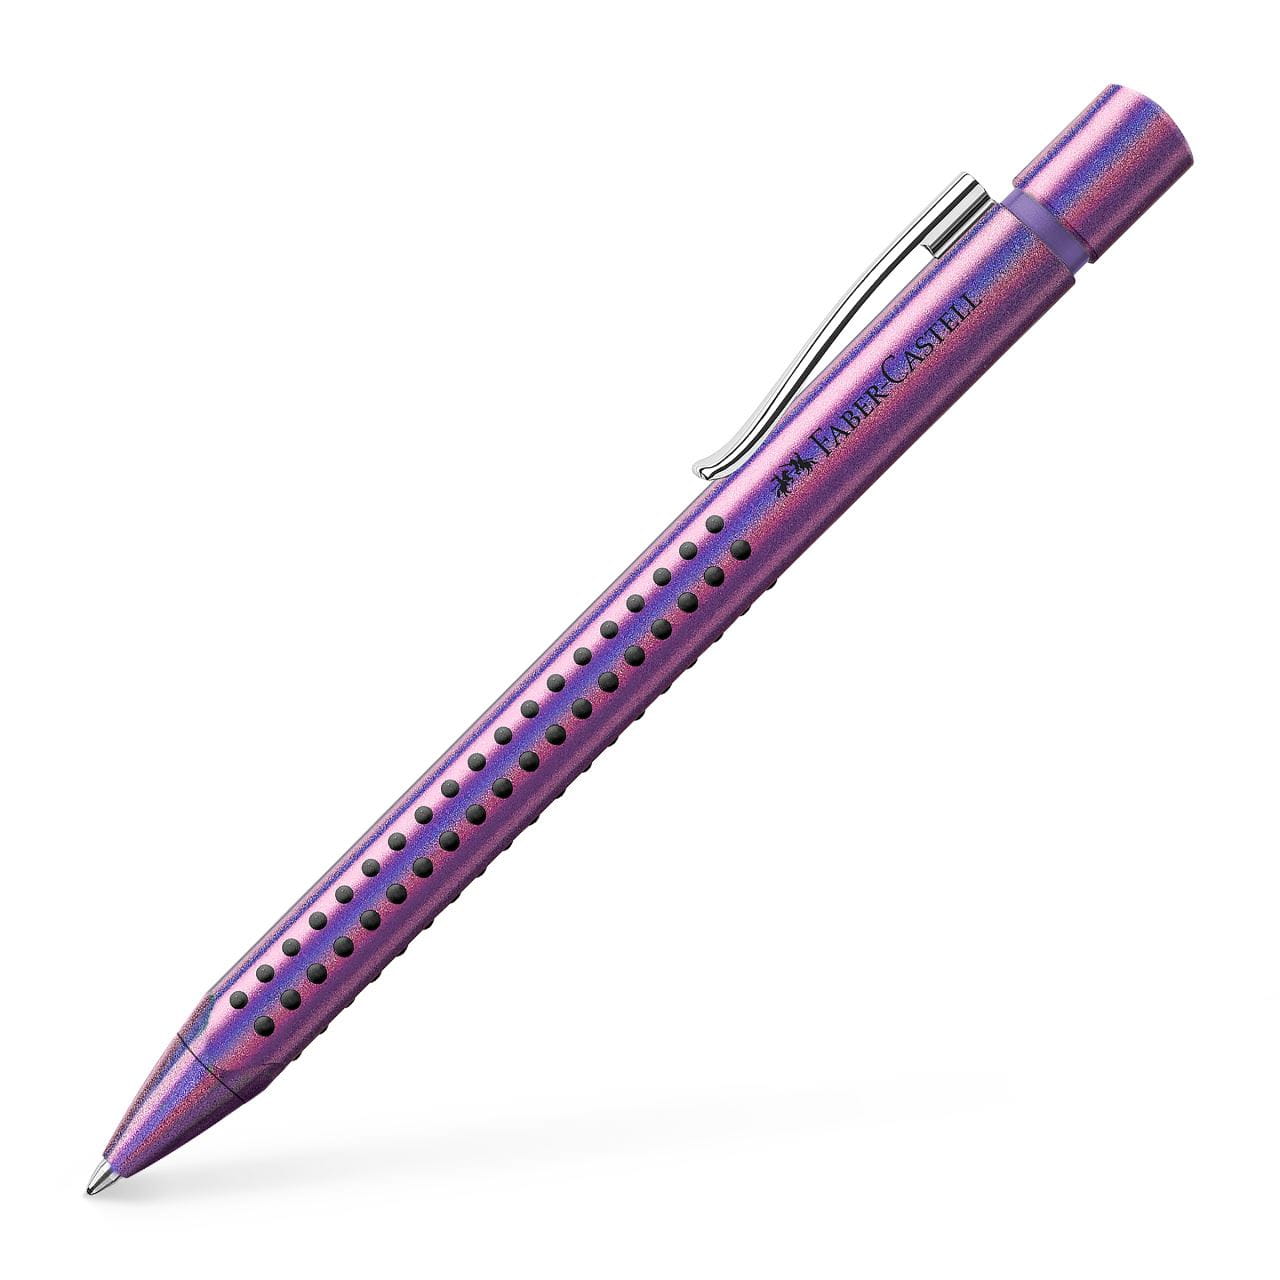 Faber-Castell - Ball Pen Grip Edition Glam XB violet